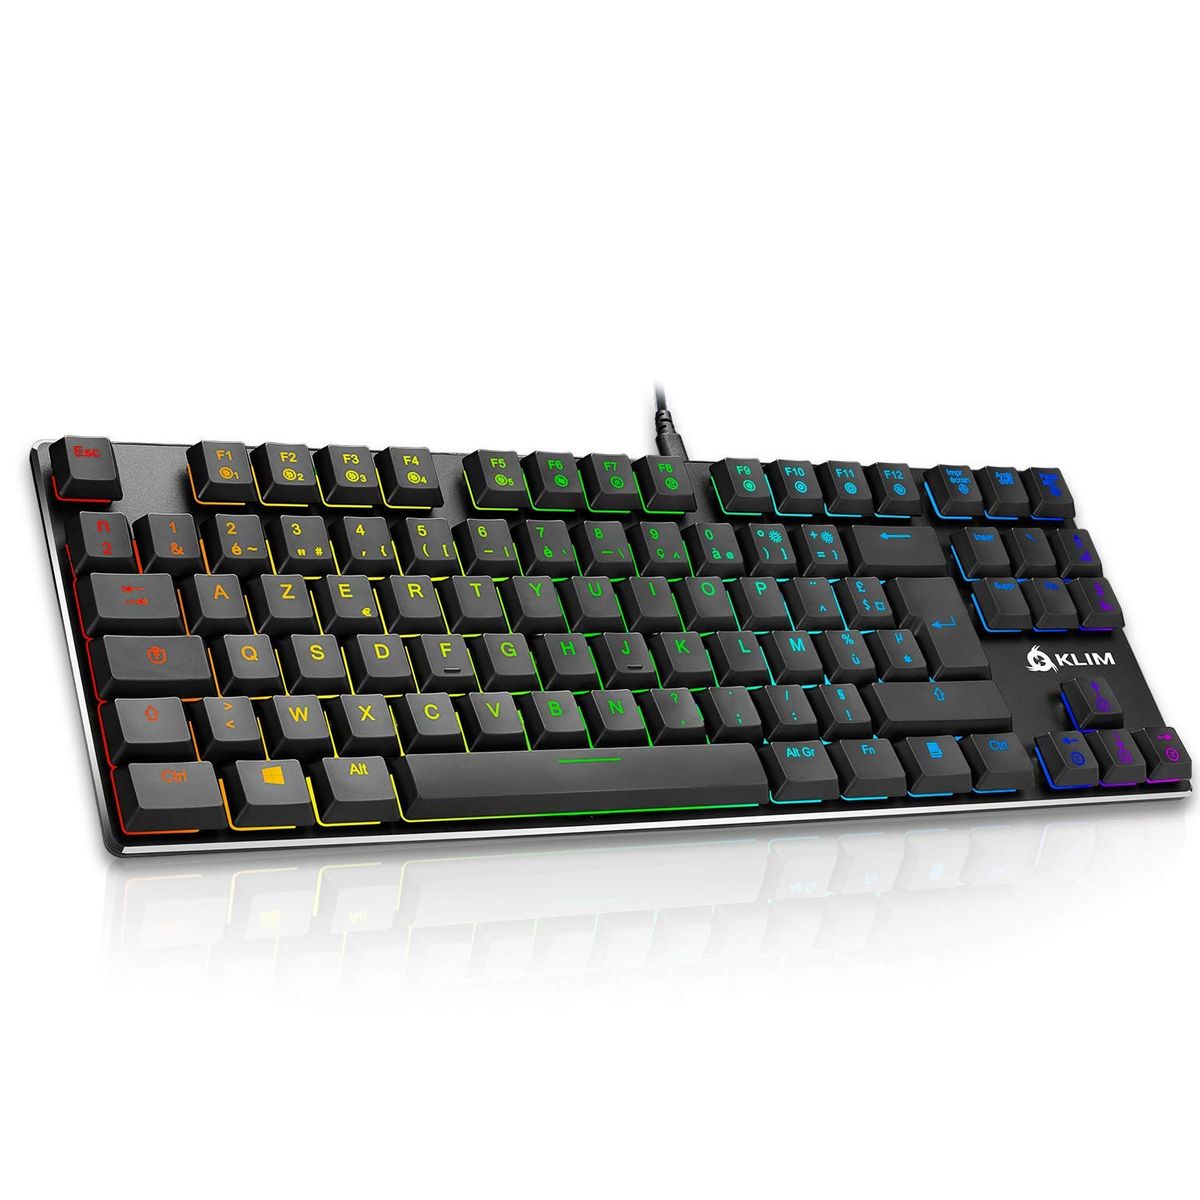 KLIM Dash TKL - Mechanical keyboard with red switches for professionals and gamers. Compact TKL keyboard without numeric keypad + RGB colors and durable metal frame (FRA Layout - AZERTY)